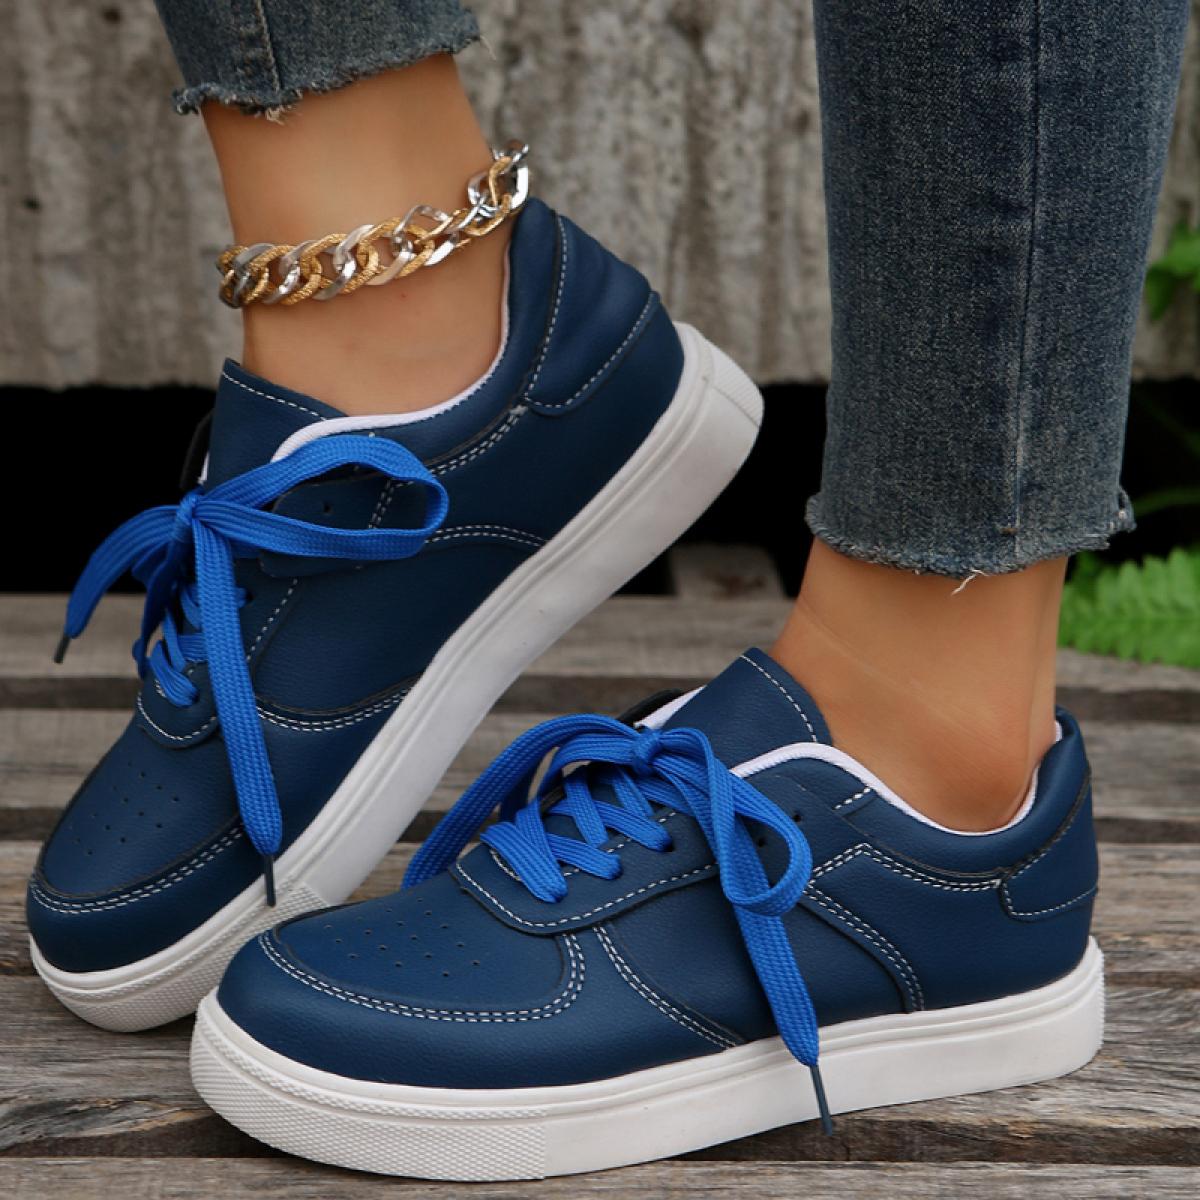 Summer New Canvas Shoes Women Korean Breathable Casual Sport Shoes Fashion  Lace Up Flat Tennis Sneakers Female Vulcanized Shoes